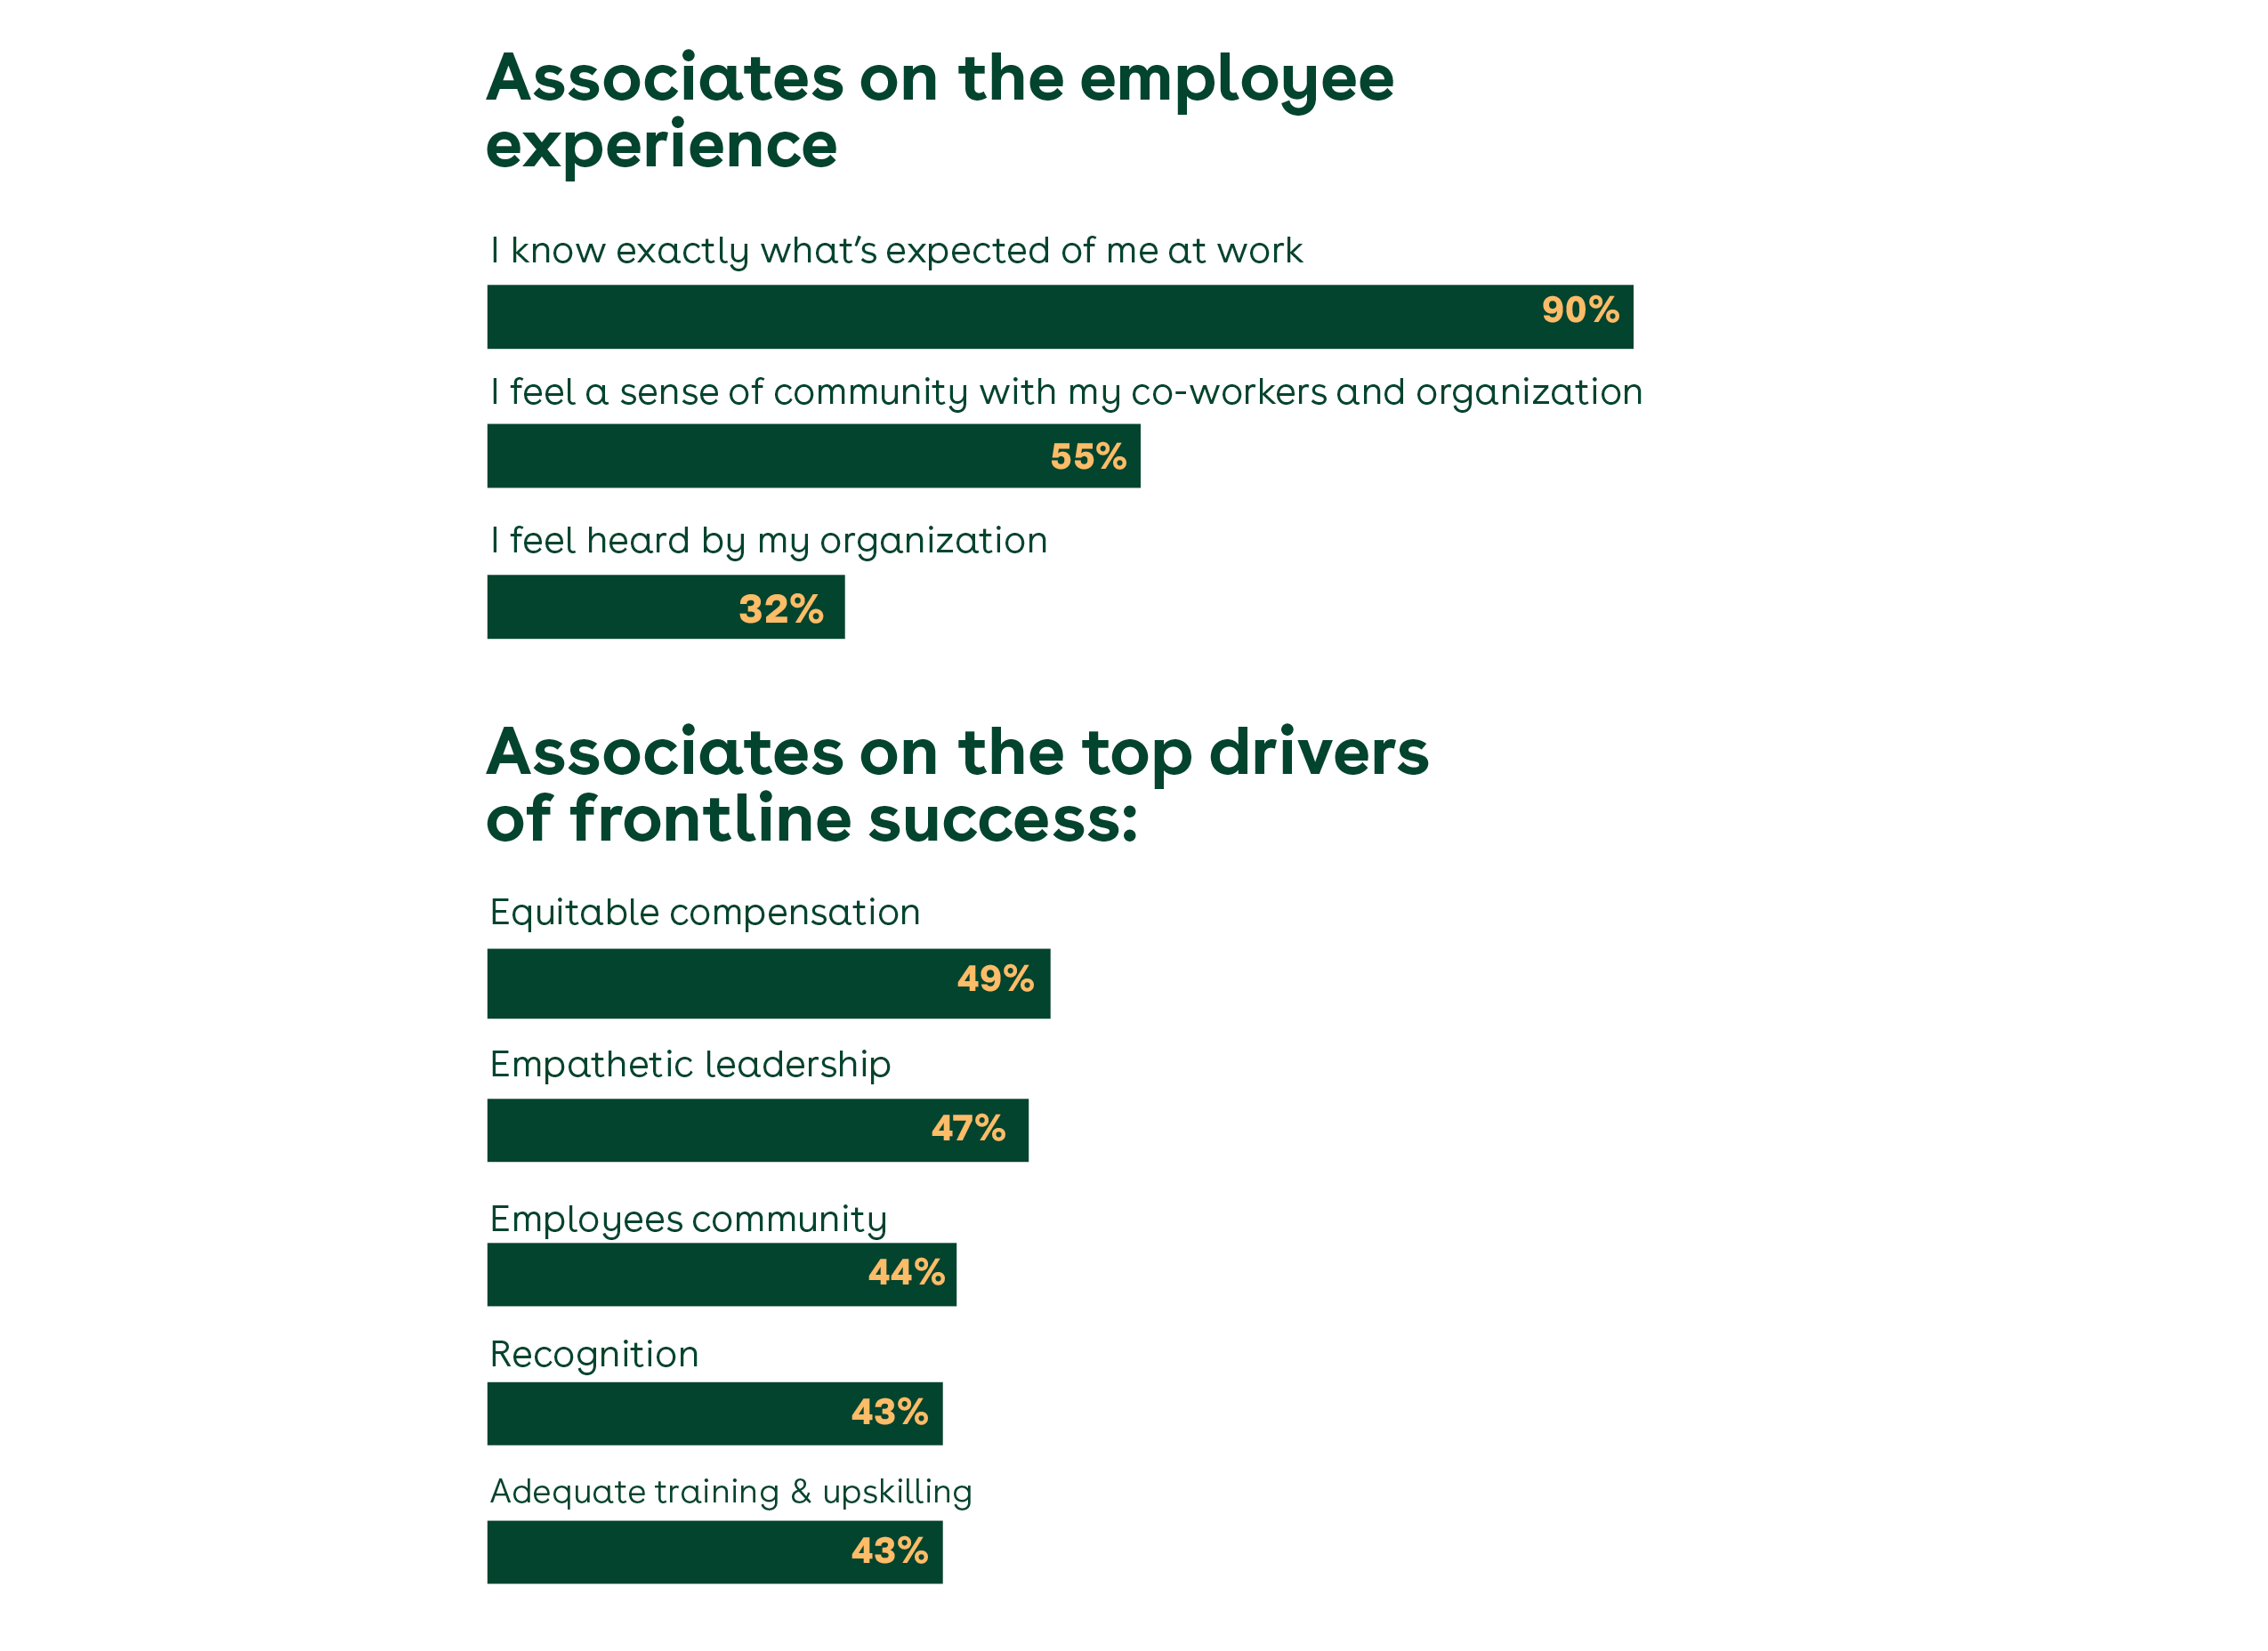 Charts displaying associate responses about the employee experience and top drivers of frontline success from The Deskless Report 2023: Retail Edition